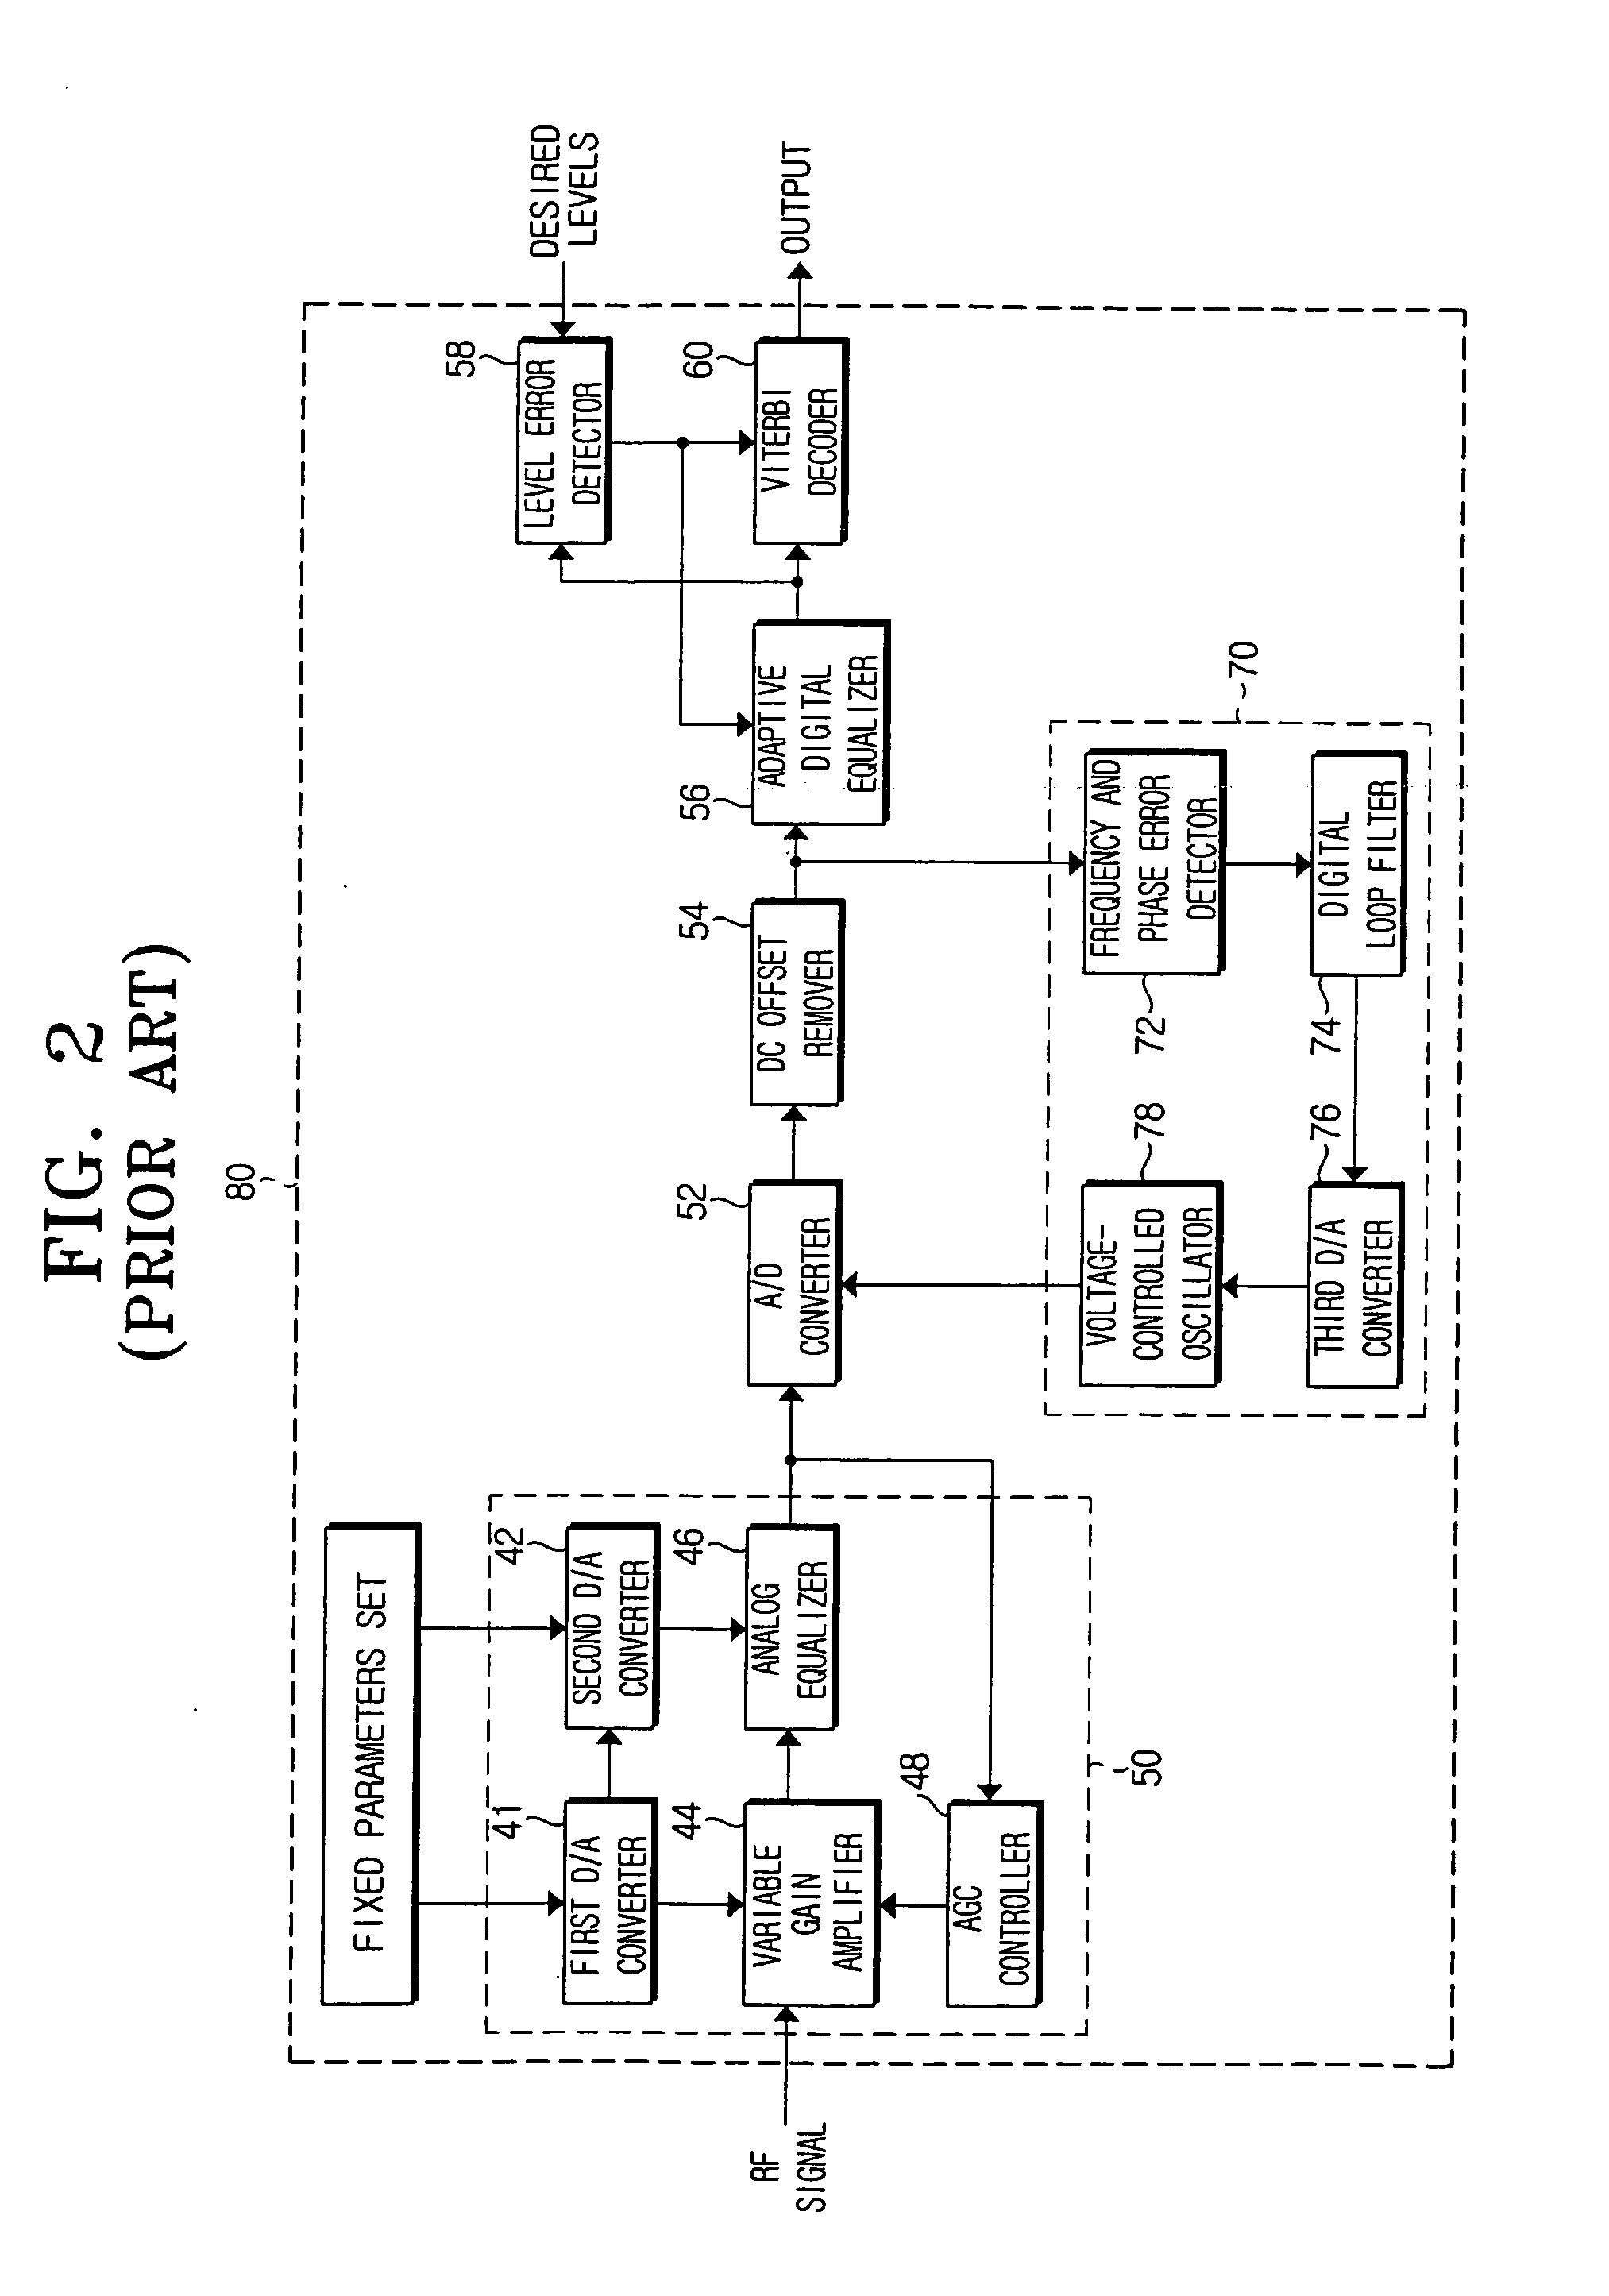 High-speed mixed analog/digital PRML data detection and clock recovery apparatus and method for data storage